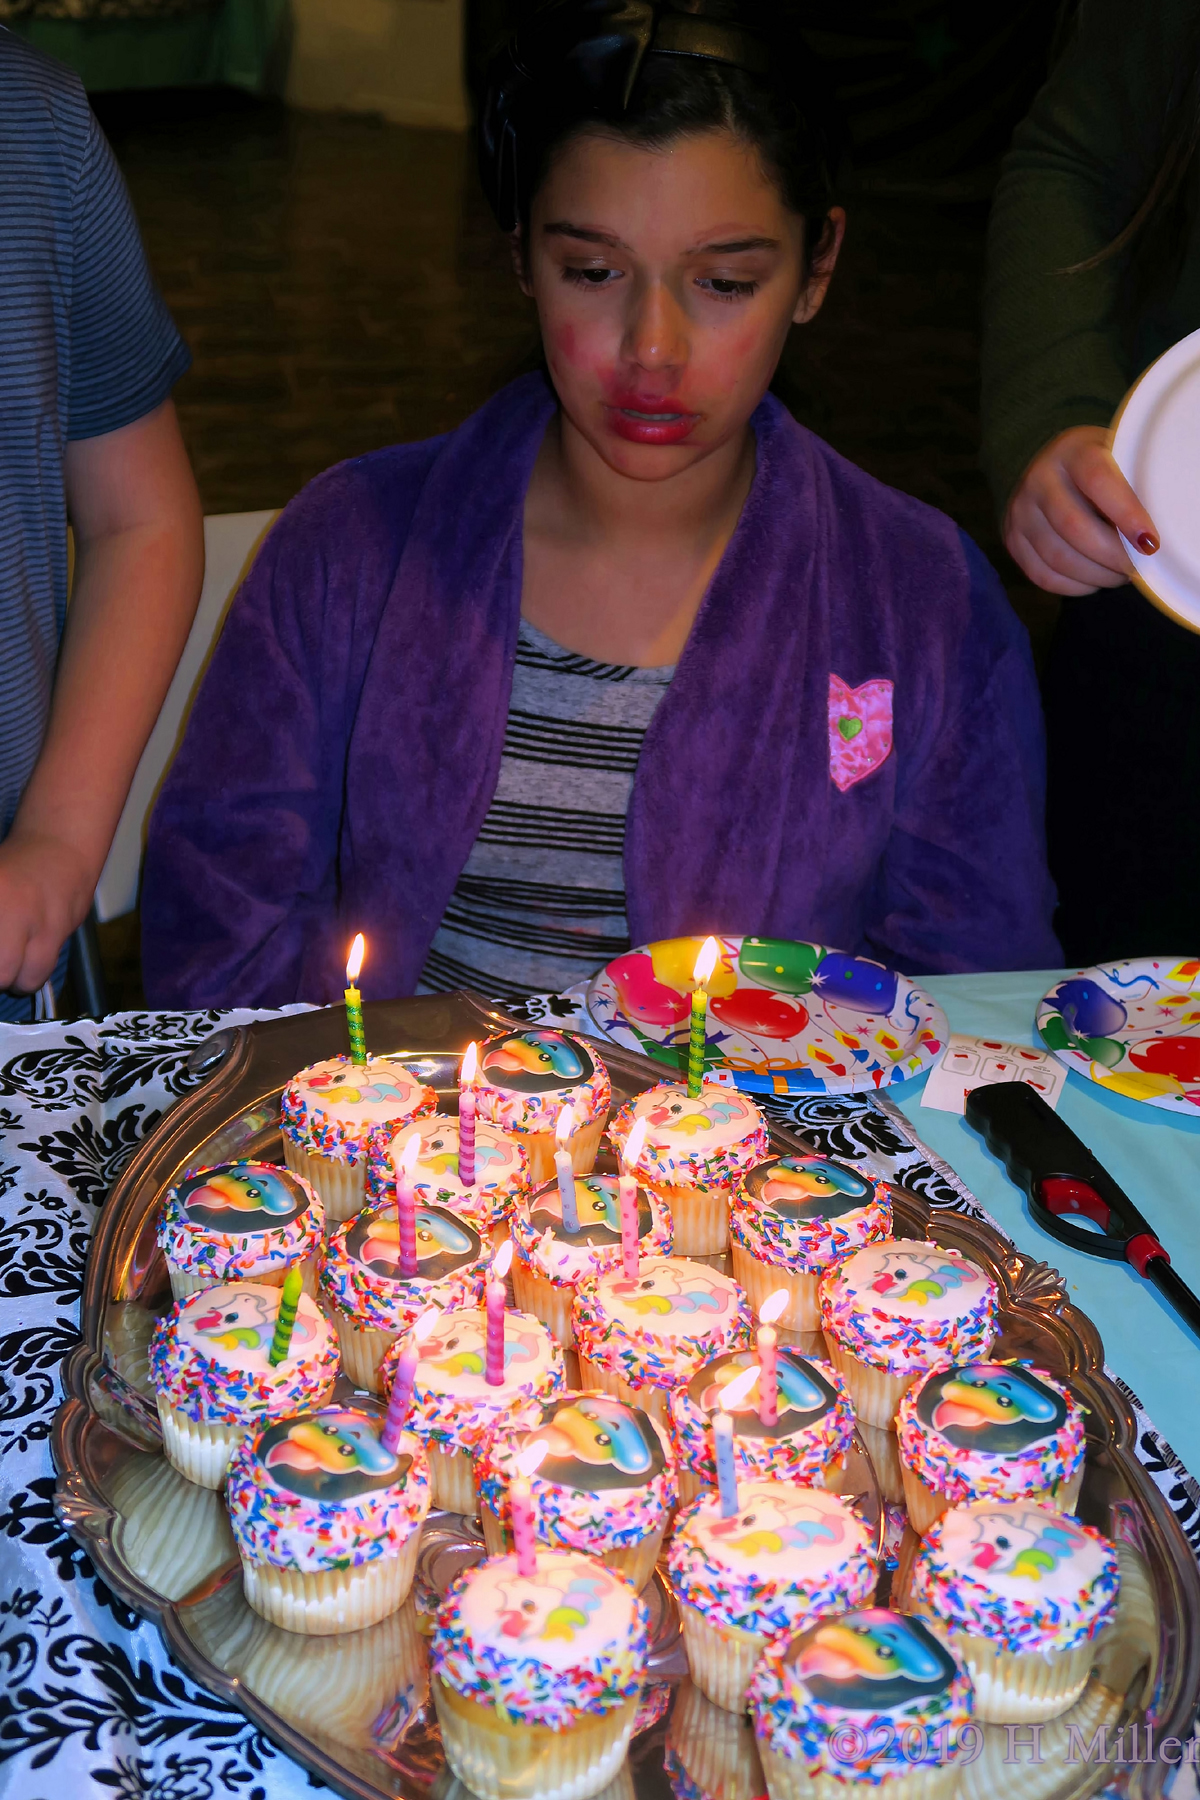 Celebrating With Cupcakes! Birthday Cupcakes At Spa Party For Kids! 1